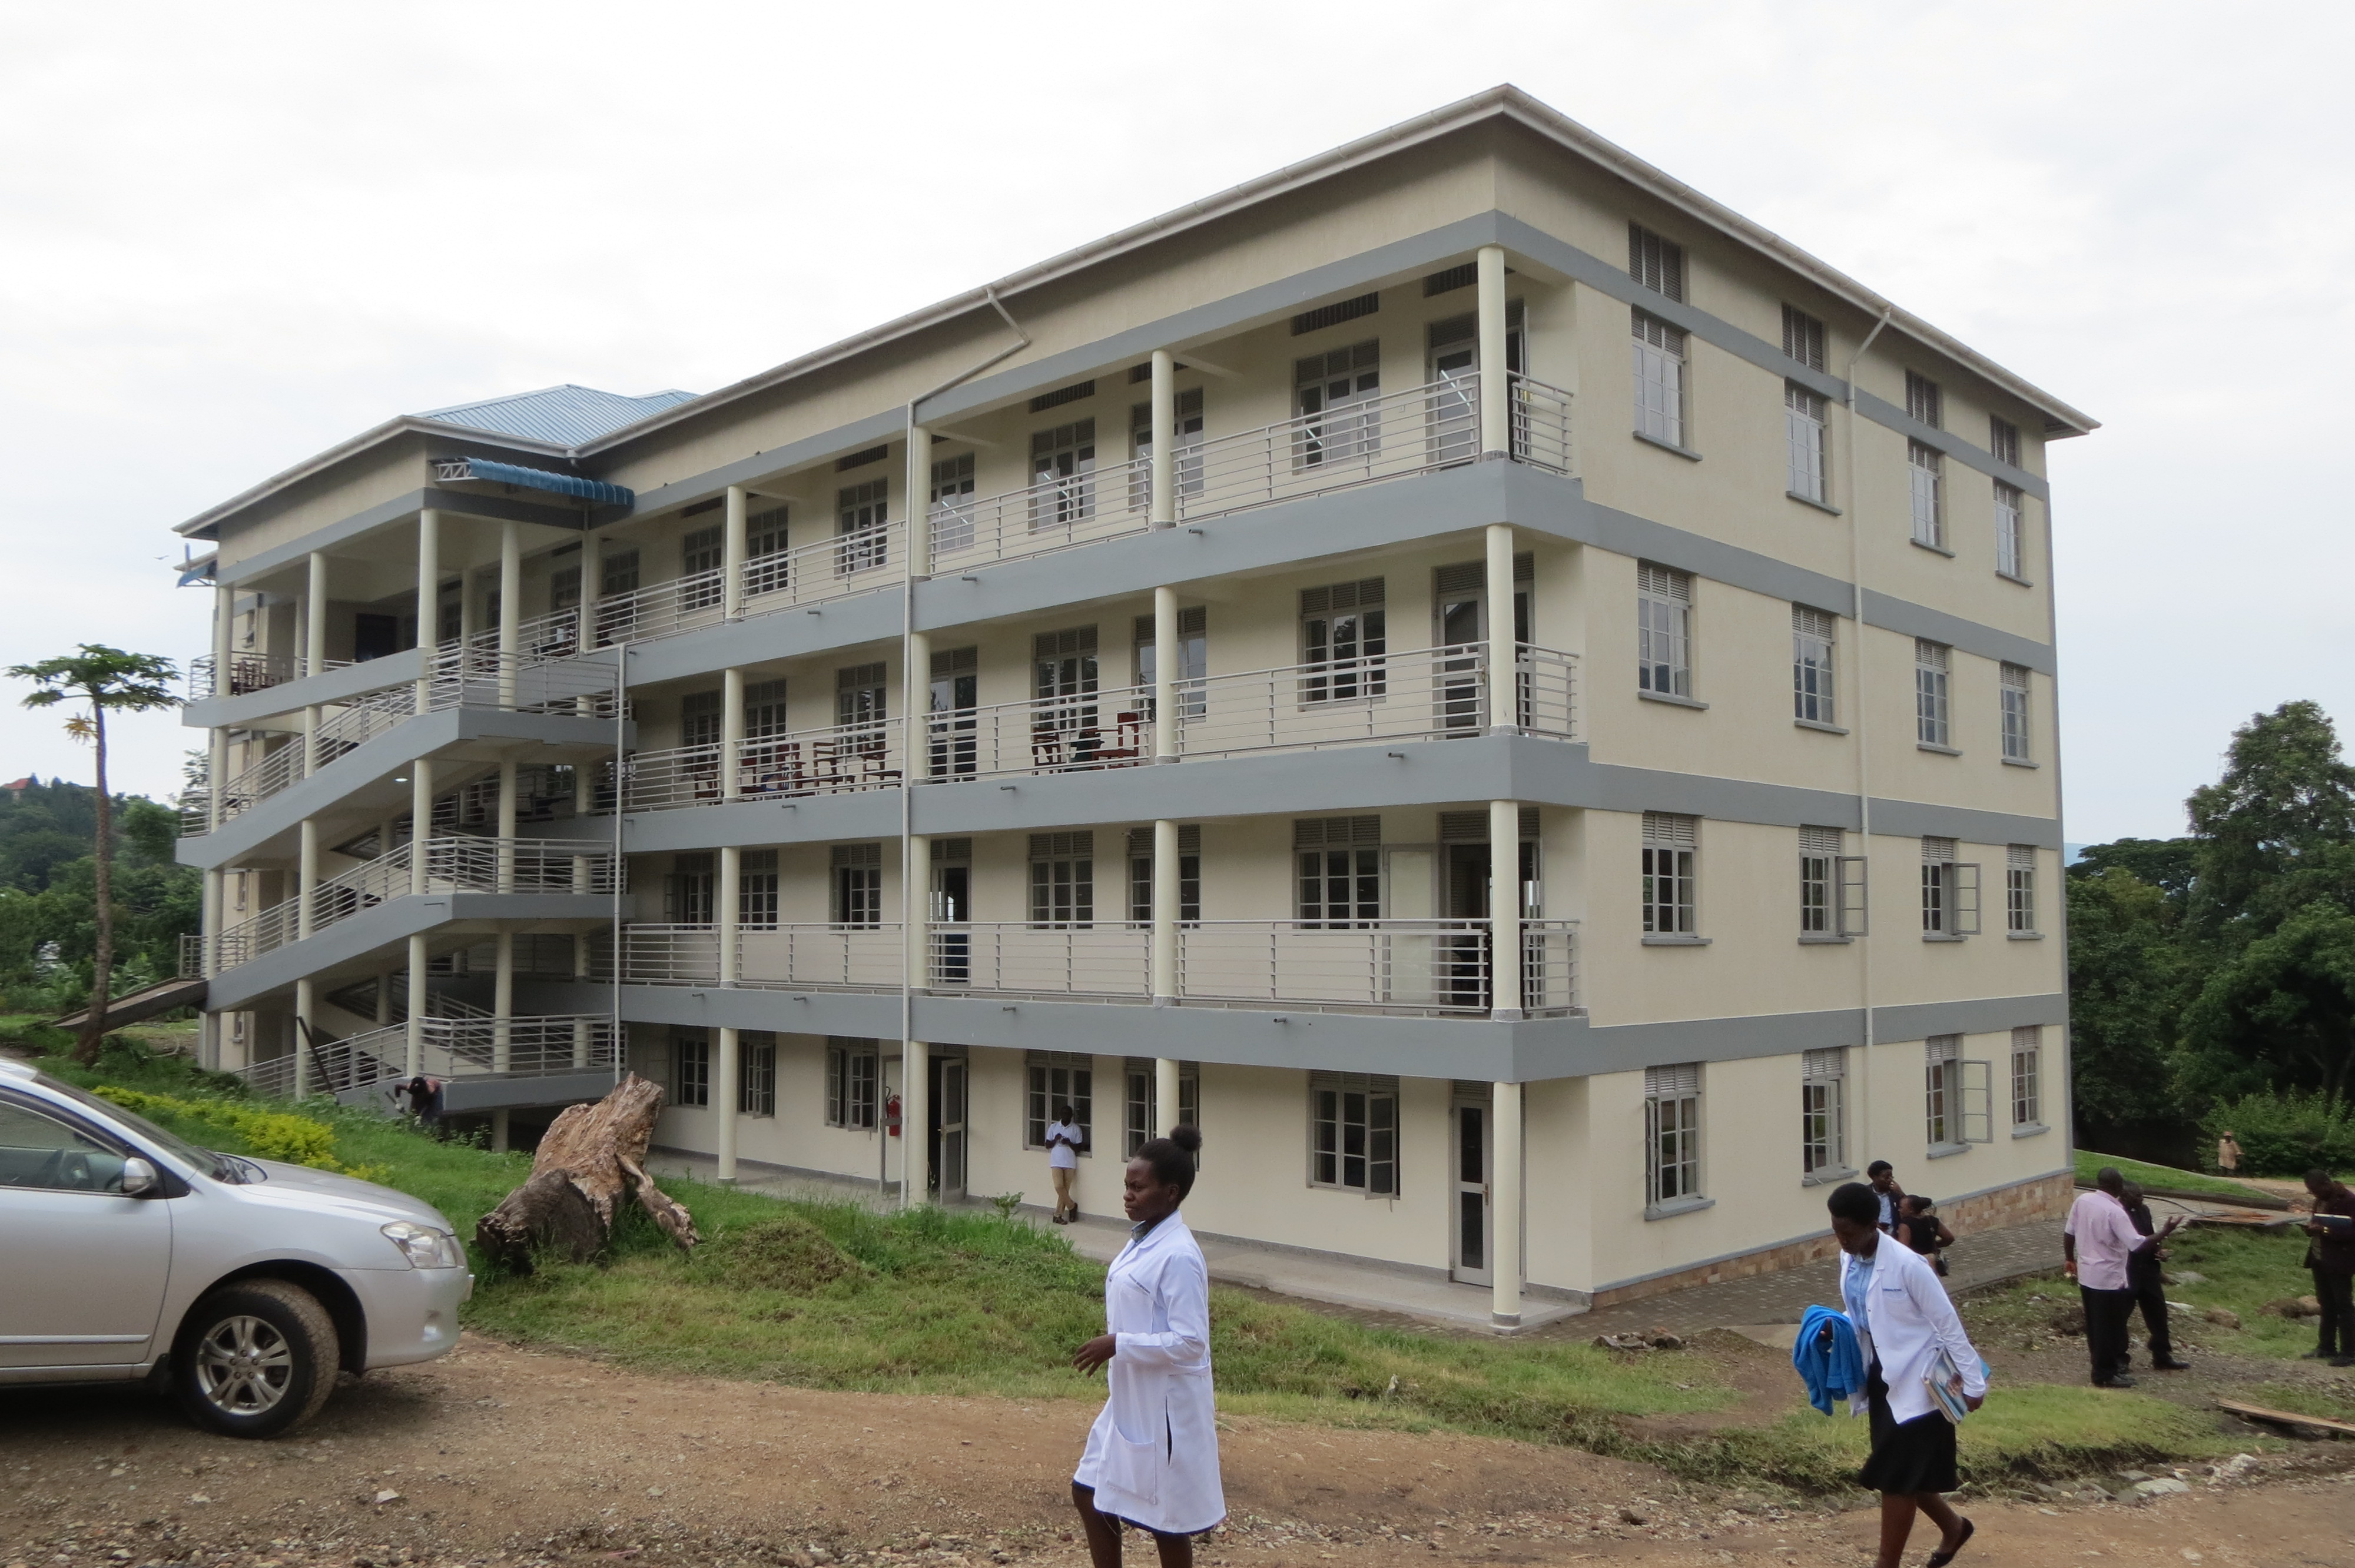 Completion of the classroom and multipurpose building at Kagando school of nursing and midwifery